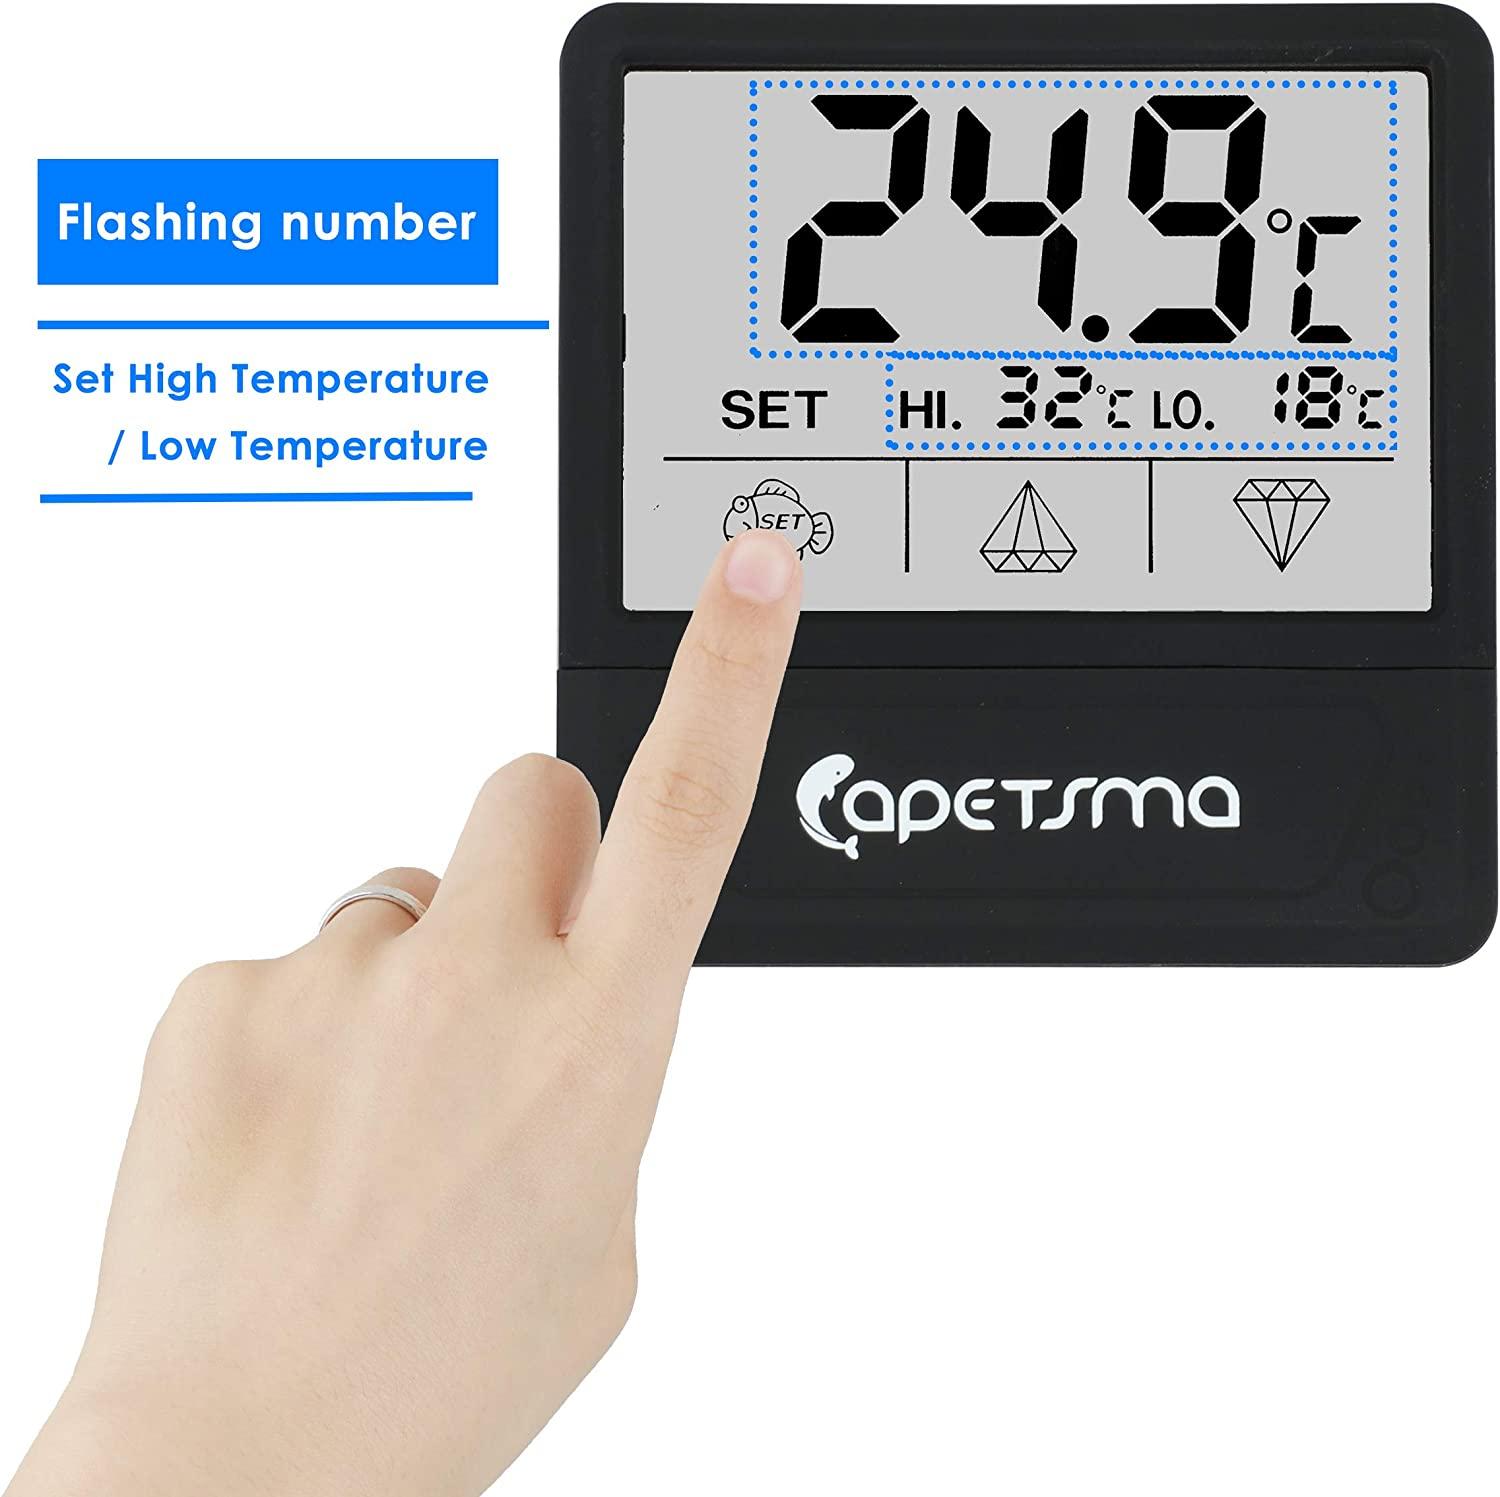 capetsma Reptile Thermometer, Digital Thermometer Hygrometer for Reptile  Terrarium, Temperature and Humidity Monitor in Acrylic and Glass Terrarium,Accurate  - Easy to Read - No Messy Wires (1 Pack)